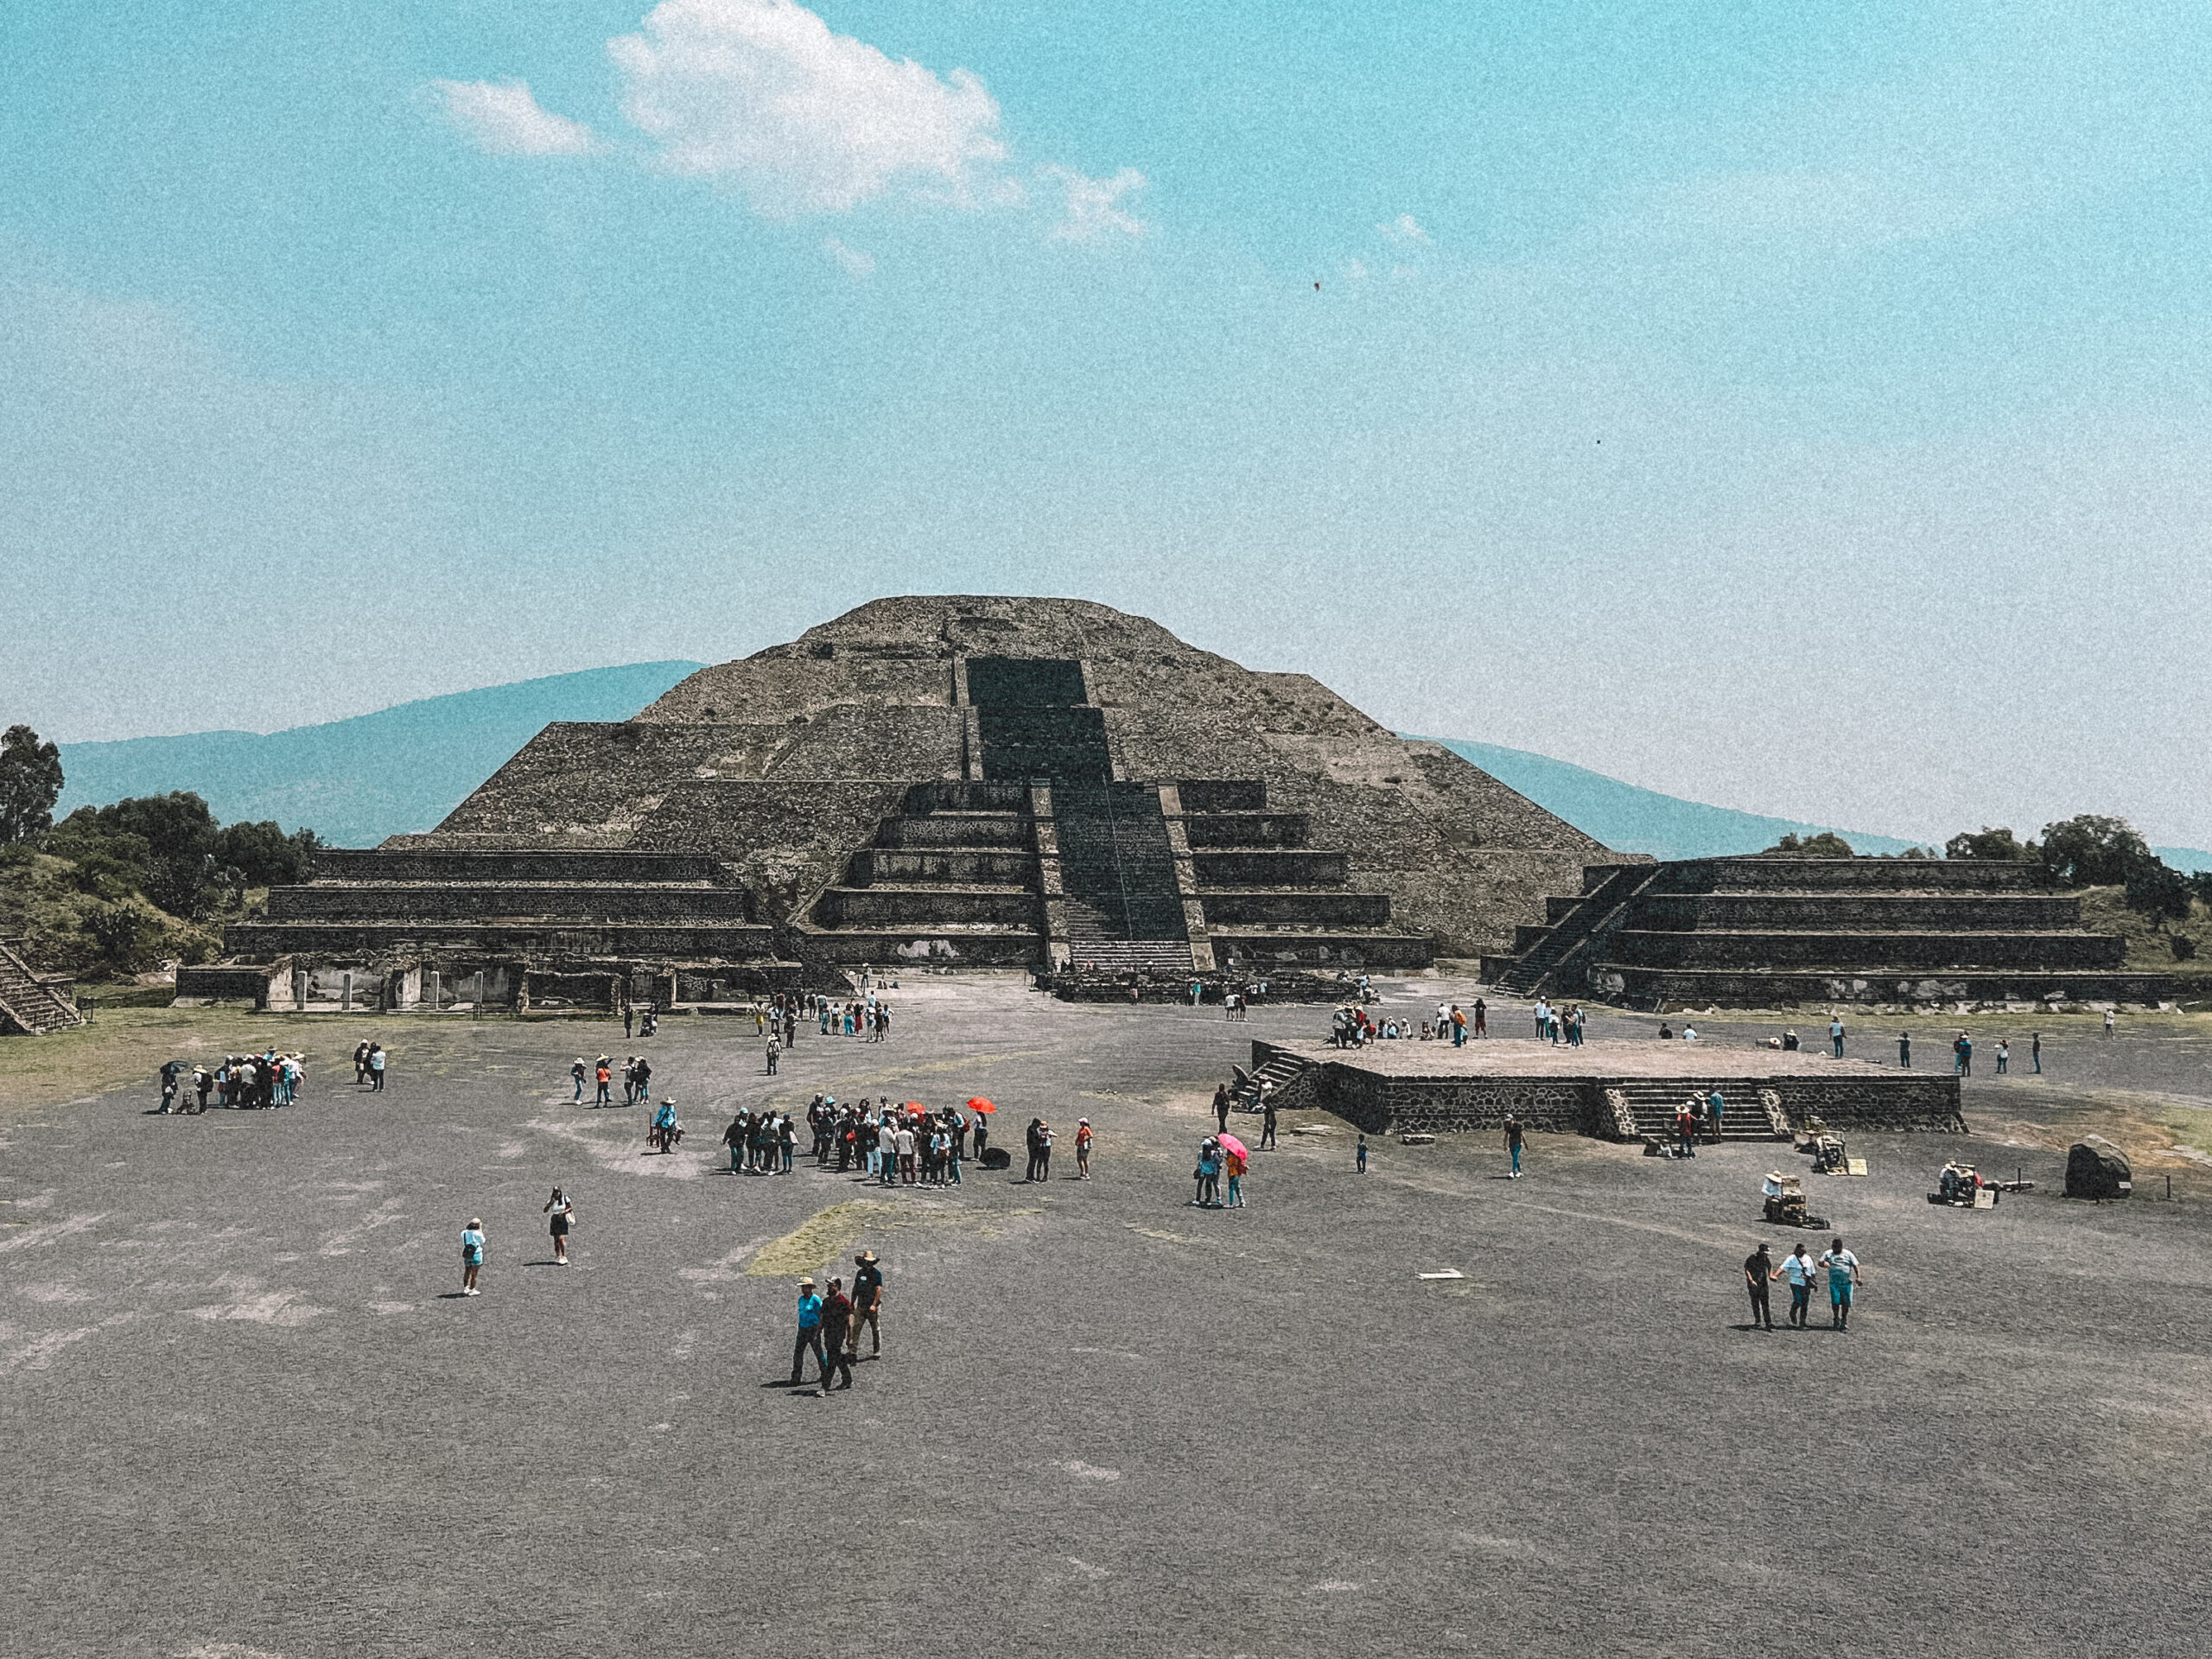 How to Plan a Day Trip to Teotihuacan from Mexico City